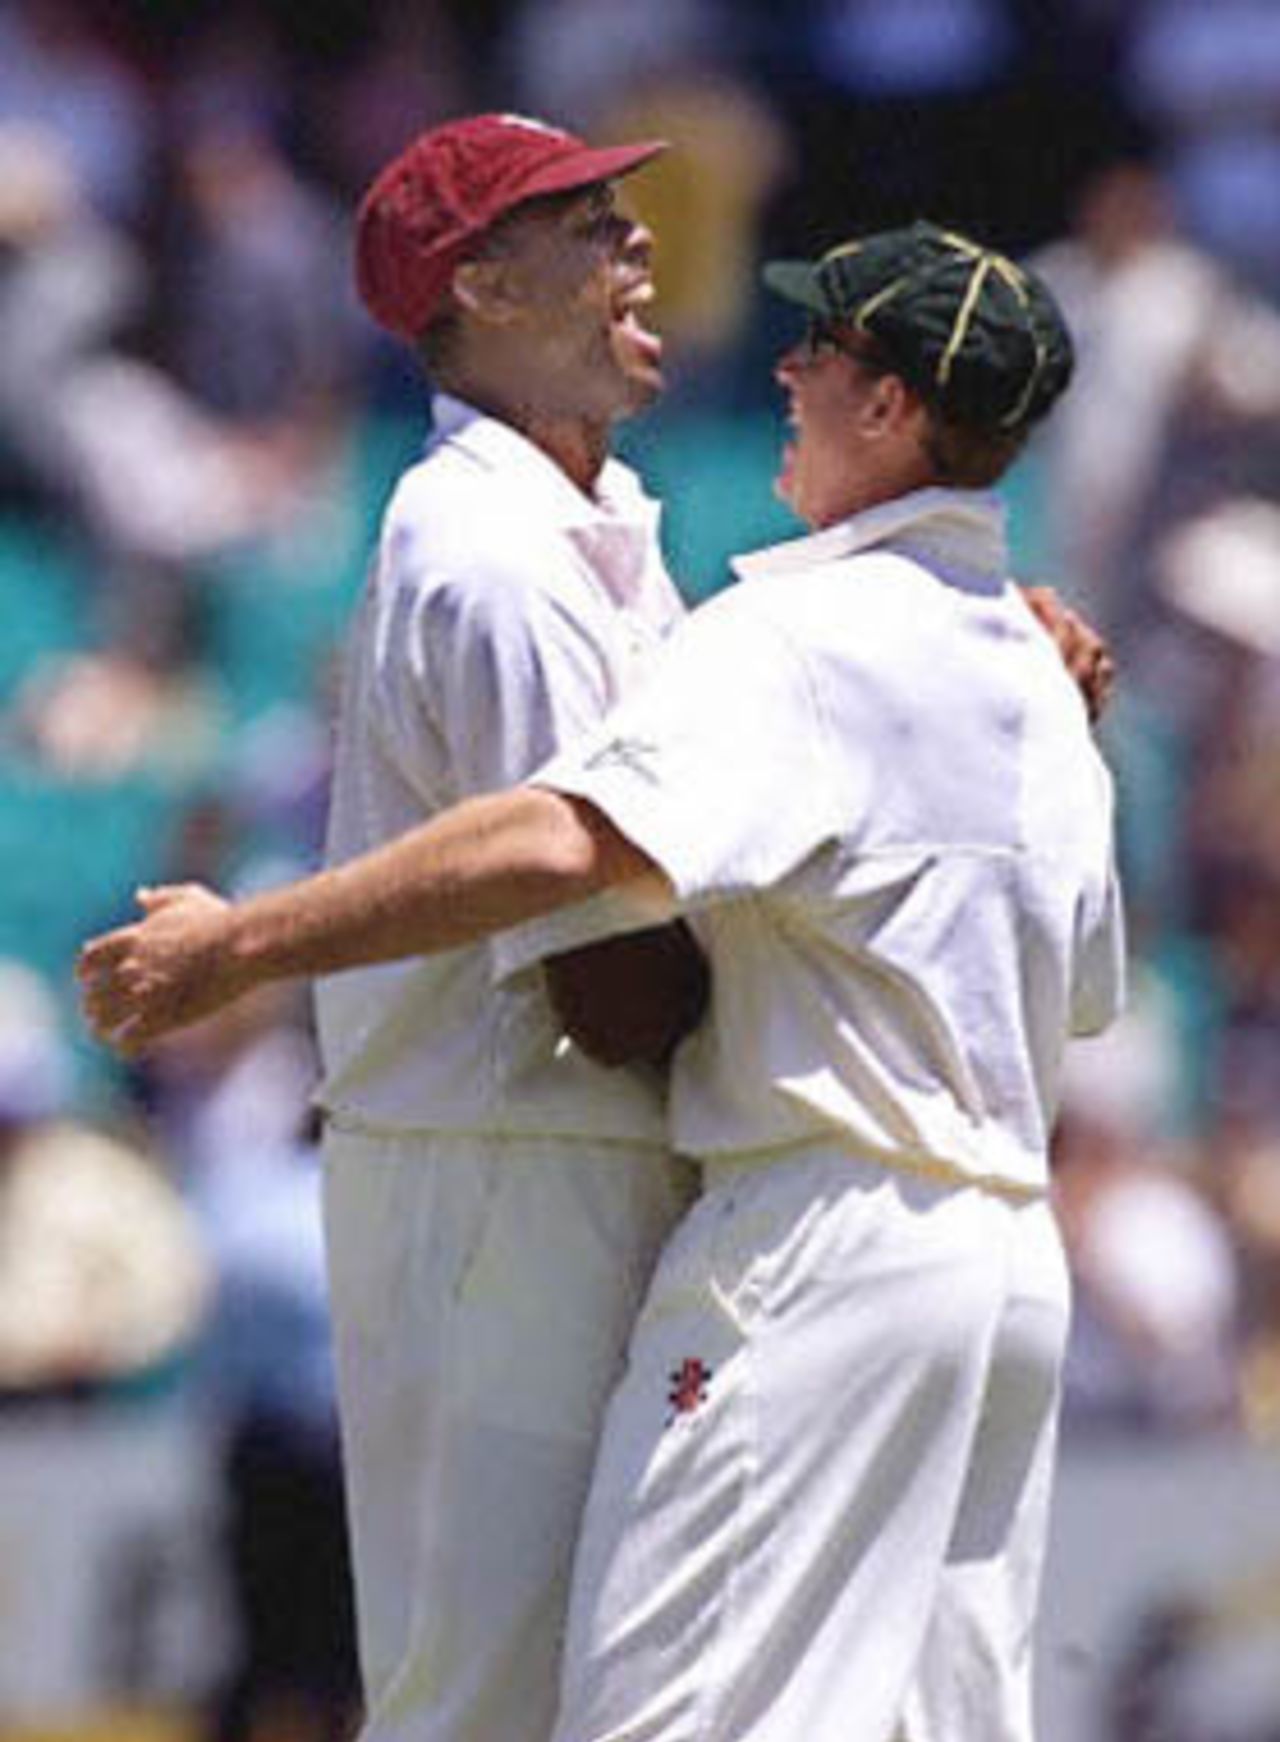 West Indian fast bowler Courtney Walsh (L) shares a close moment with Australian captain Steve Waugh (R) after Australia won the Sir Frank Worrell cup at the Sydney Cricket ground 06 January 2001. Australia won the five day test with 7 wickets in hand.